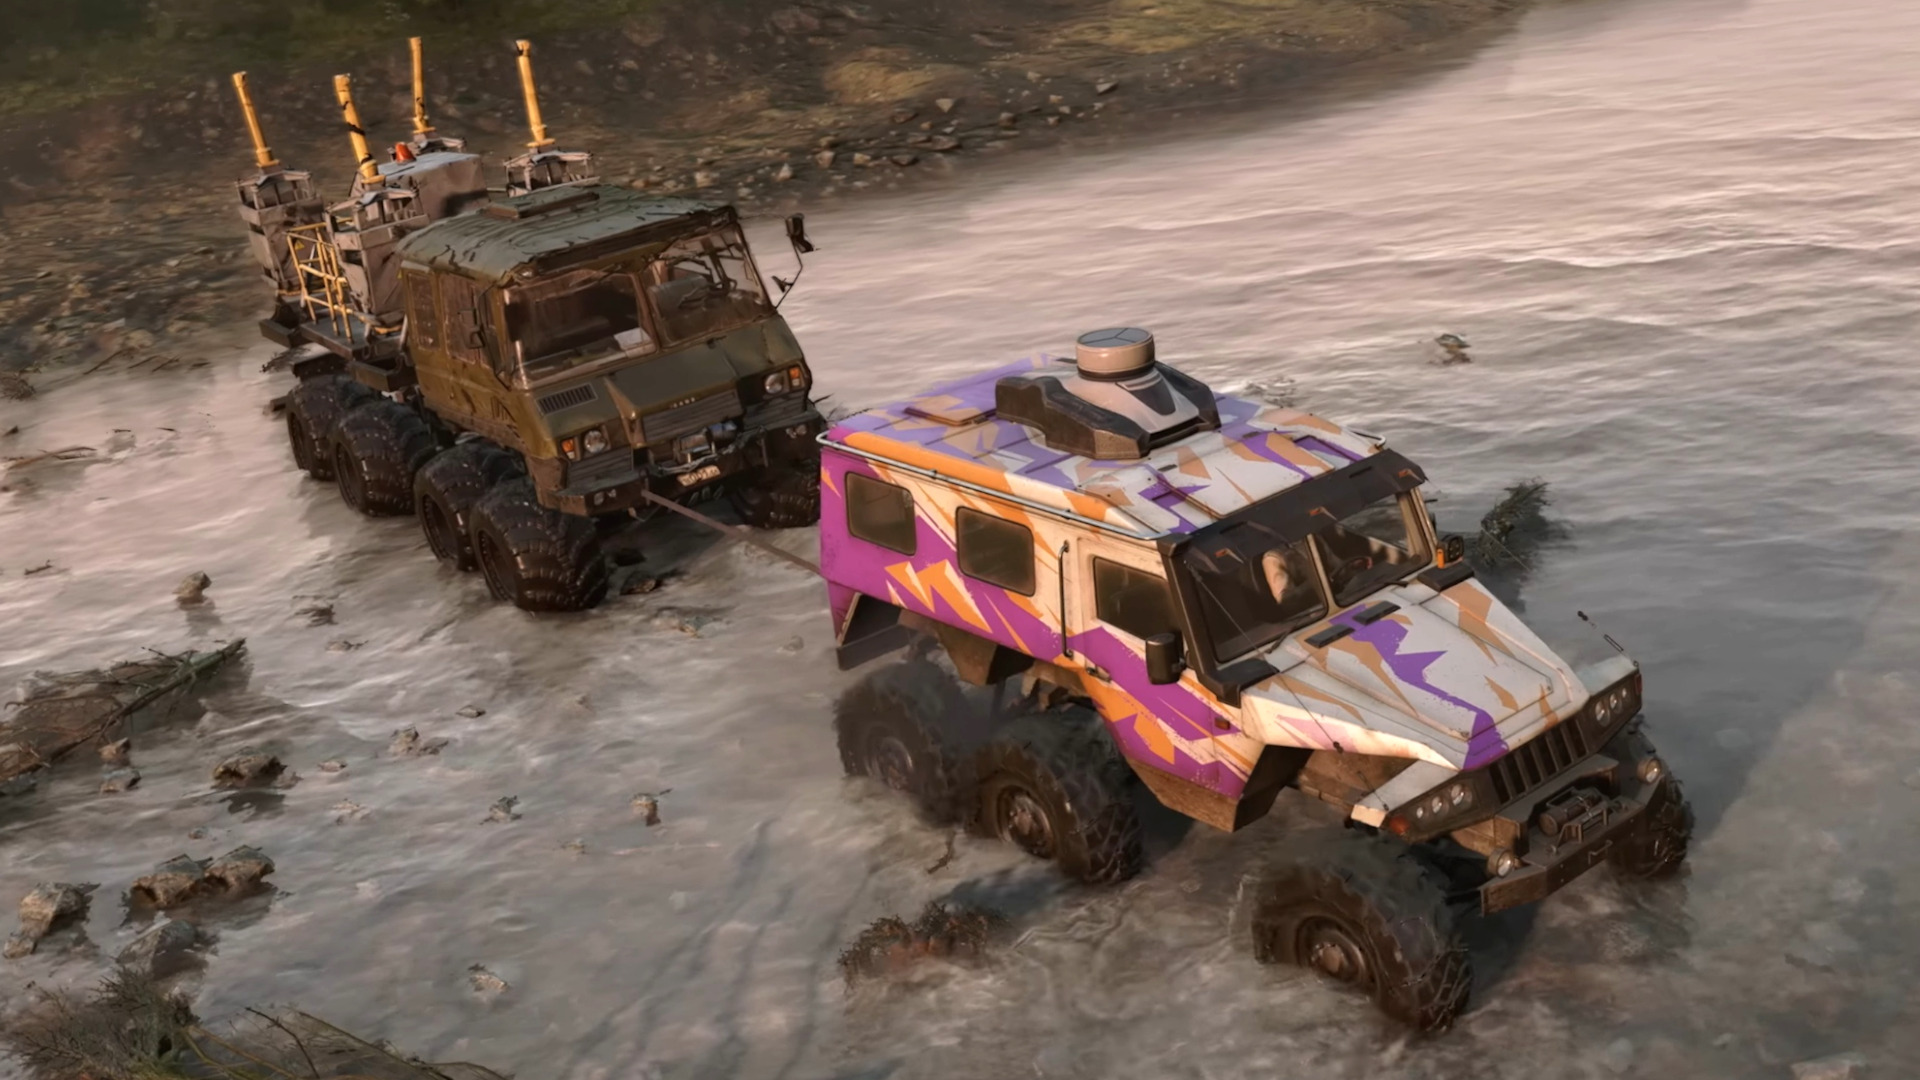 The Next MudRunner Game Looks Like the First Real Overlanding Video Game